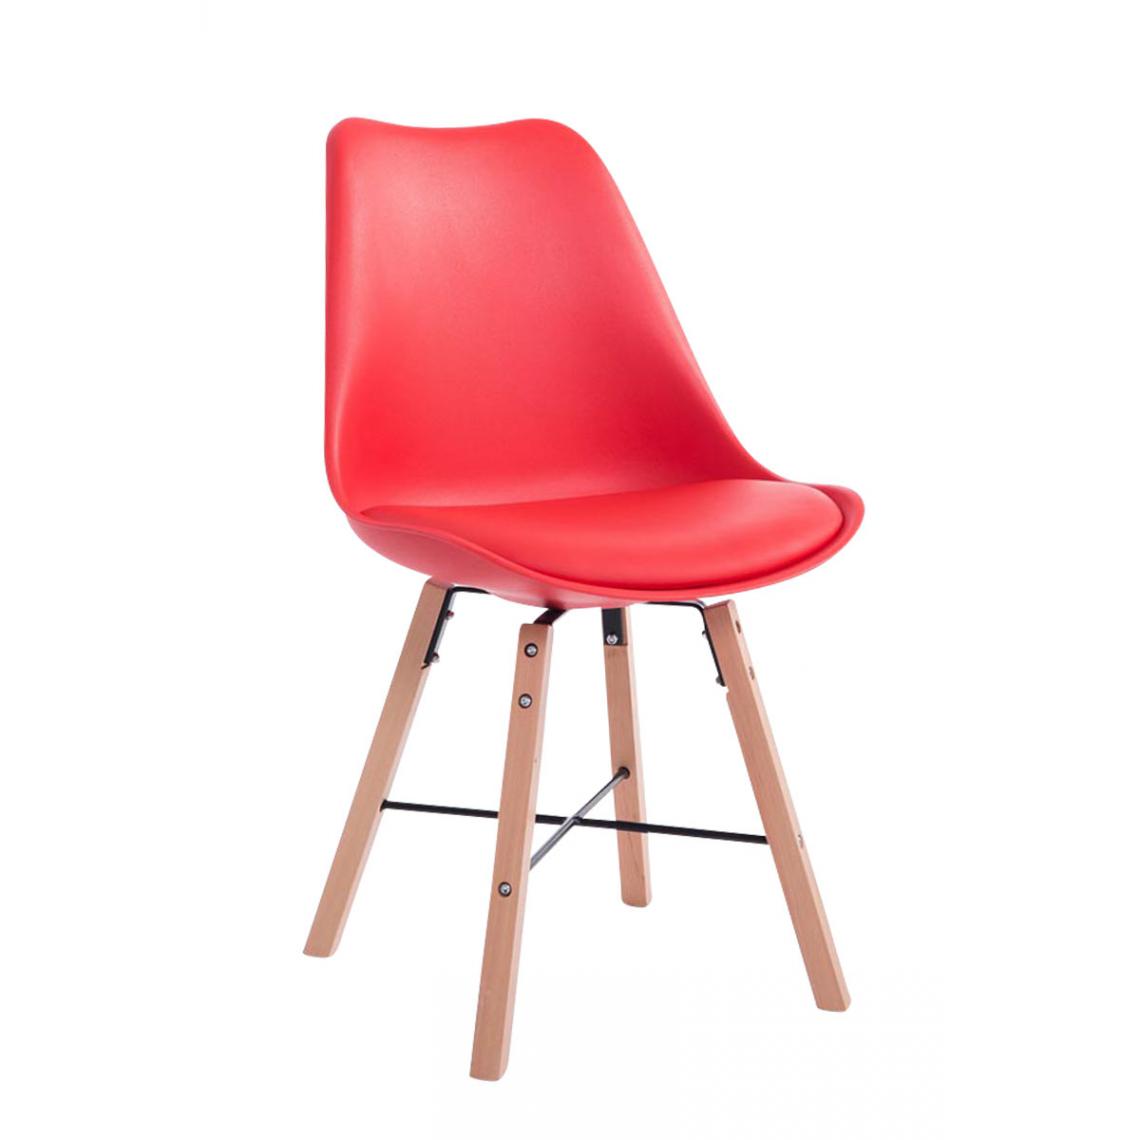 Icaverne - Moderne Chaise visiteur reference Riga Natura couleur rouge - Chaises